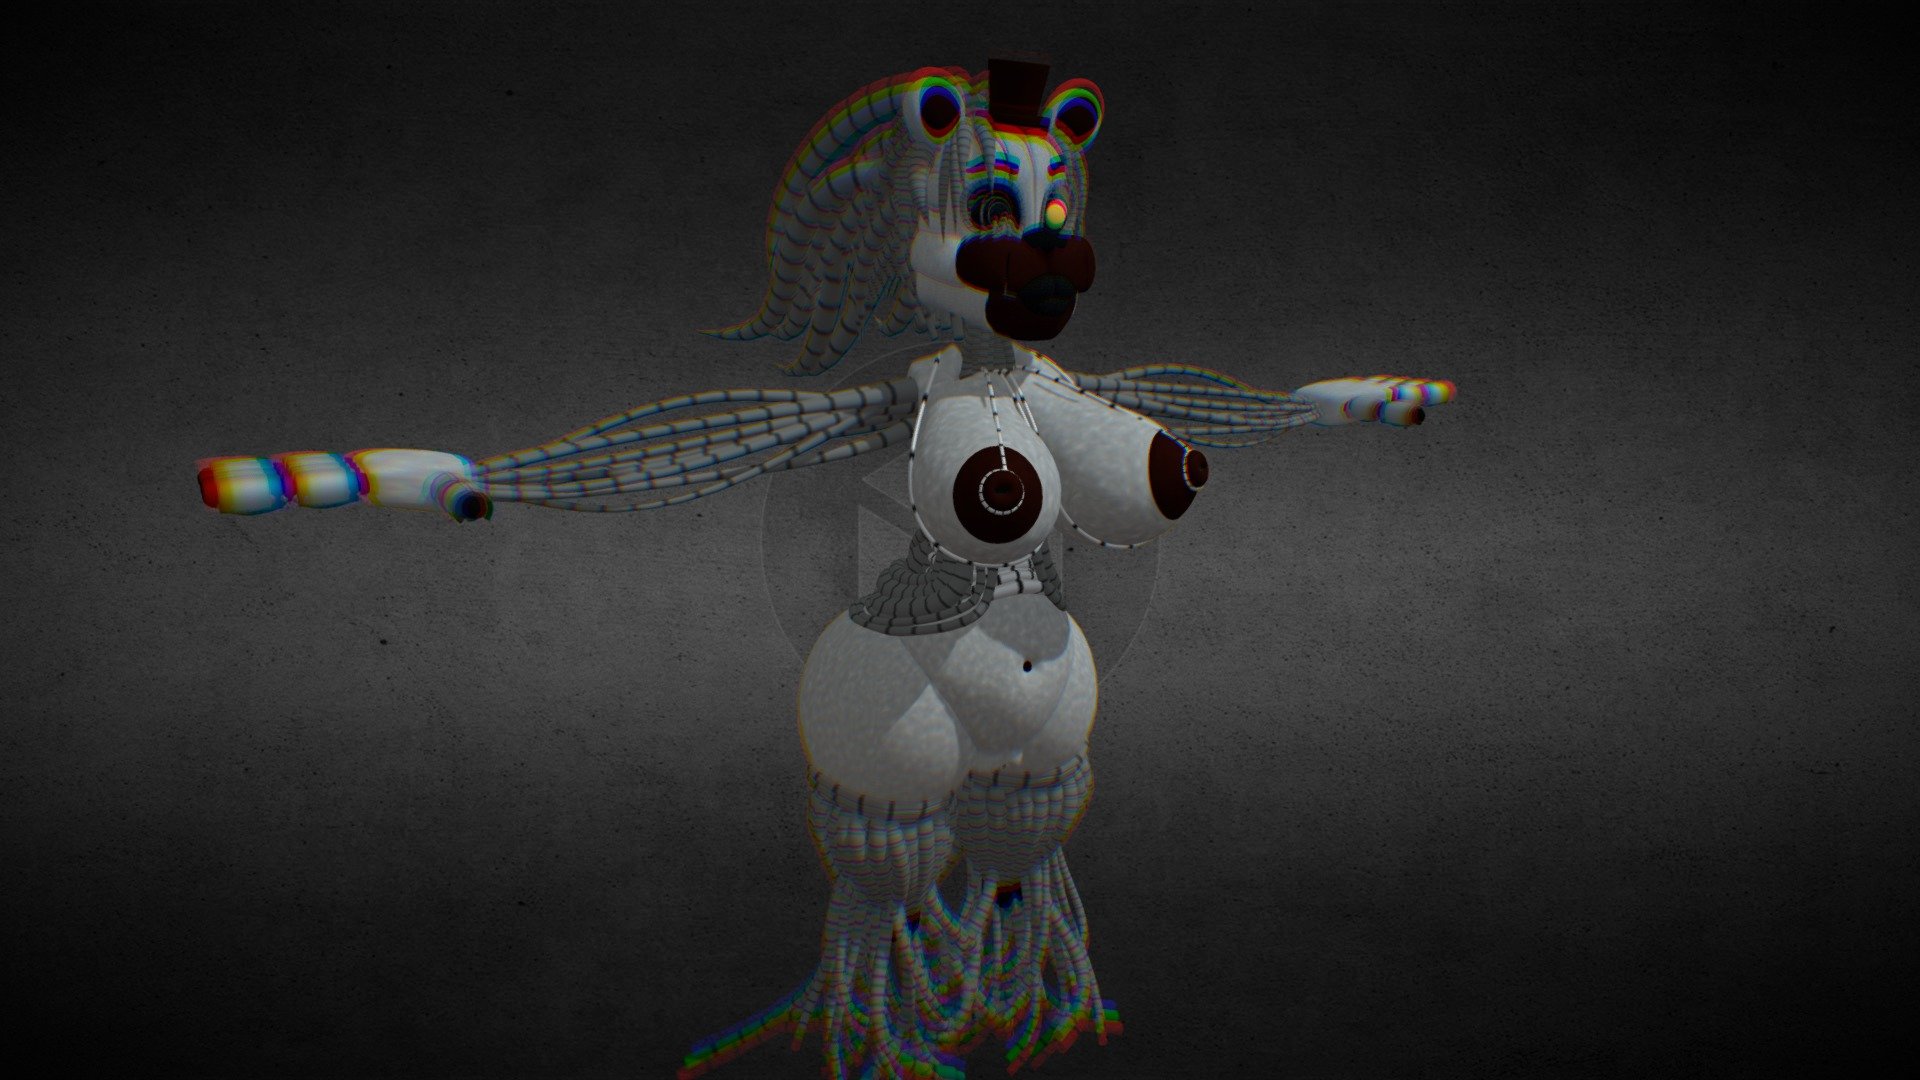 Molten Freddy - Download Free 3D model by Eire (@Eire) [95531be]